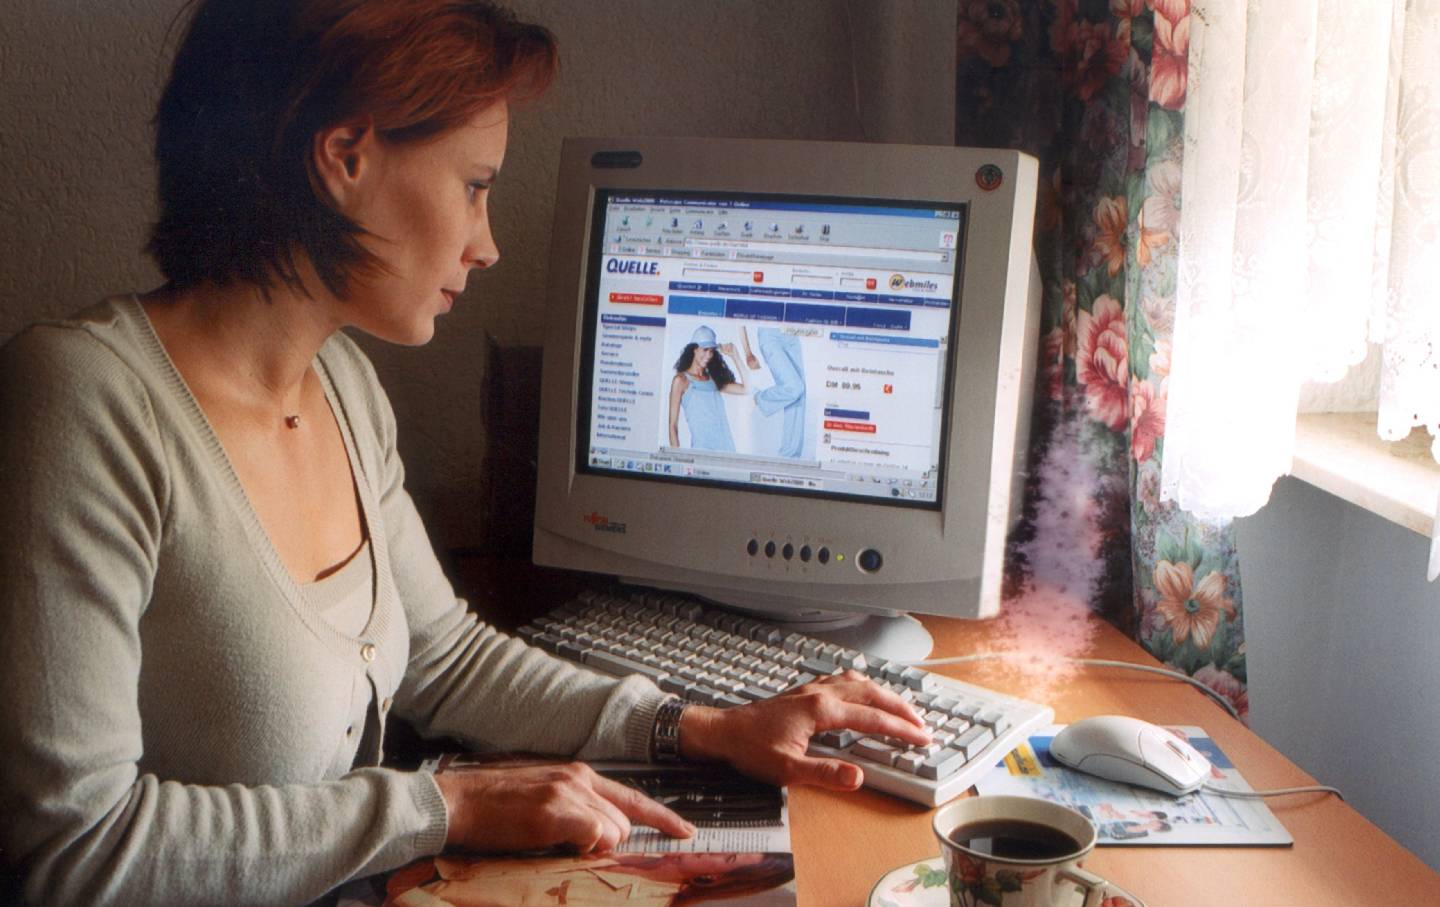 A young woman has a cup of coffee while shopping on the Internet in the 1990s.